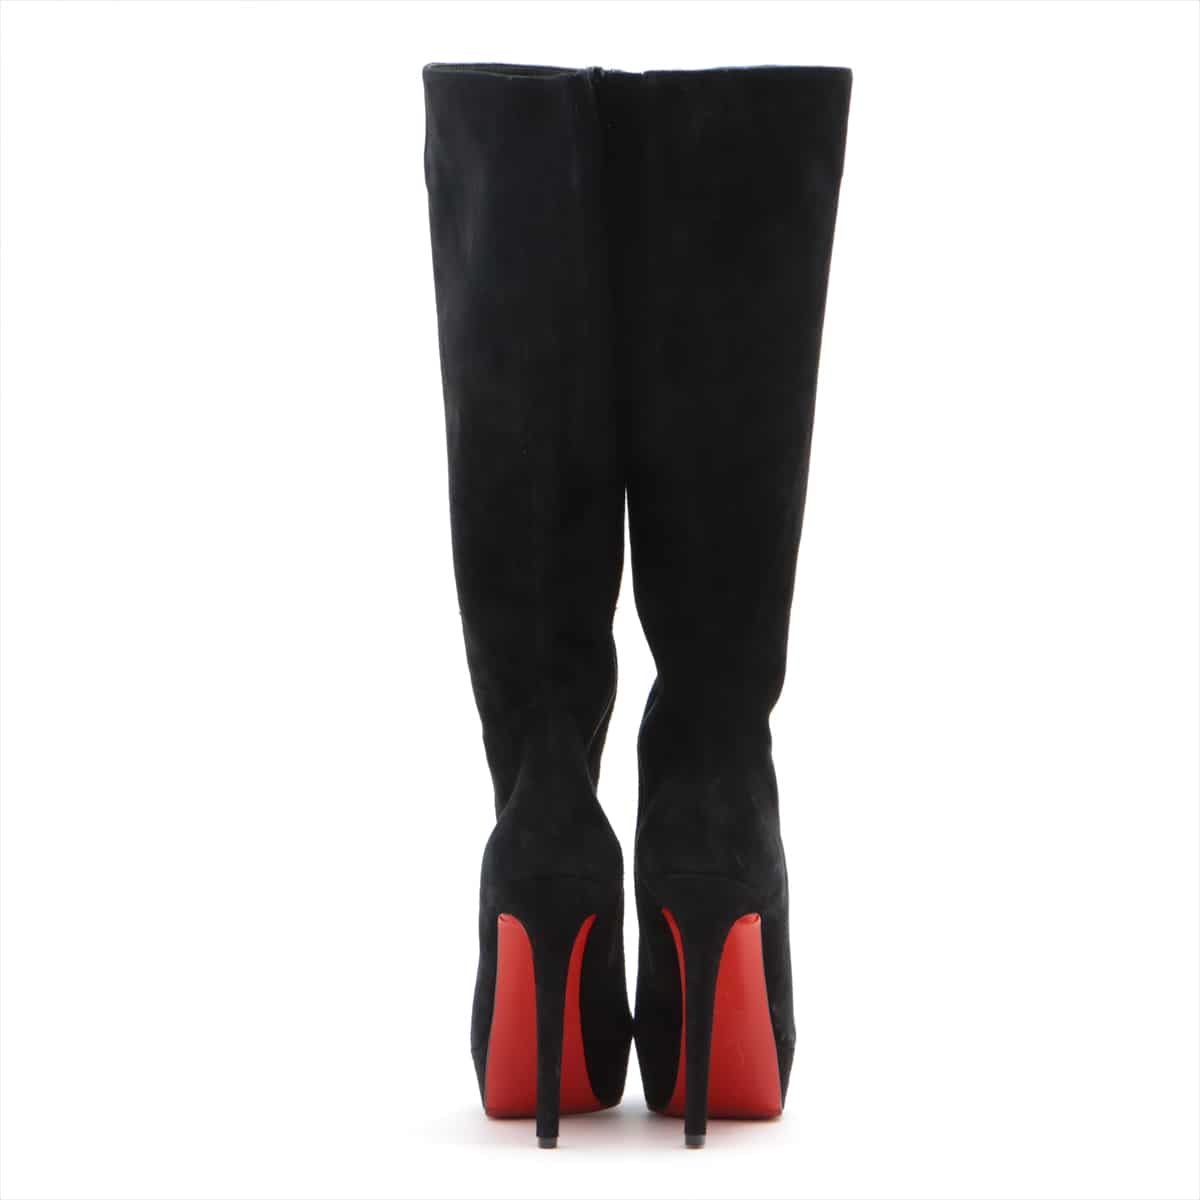 Christian Louboutin Suede Long boots 36 1/2 Ladies' Black There are threads and fraying in various places